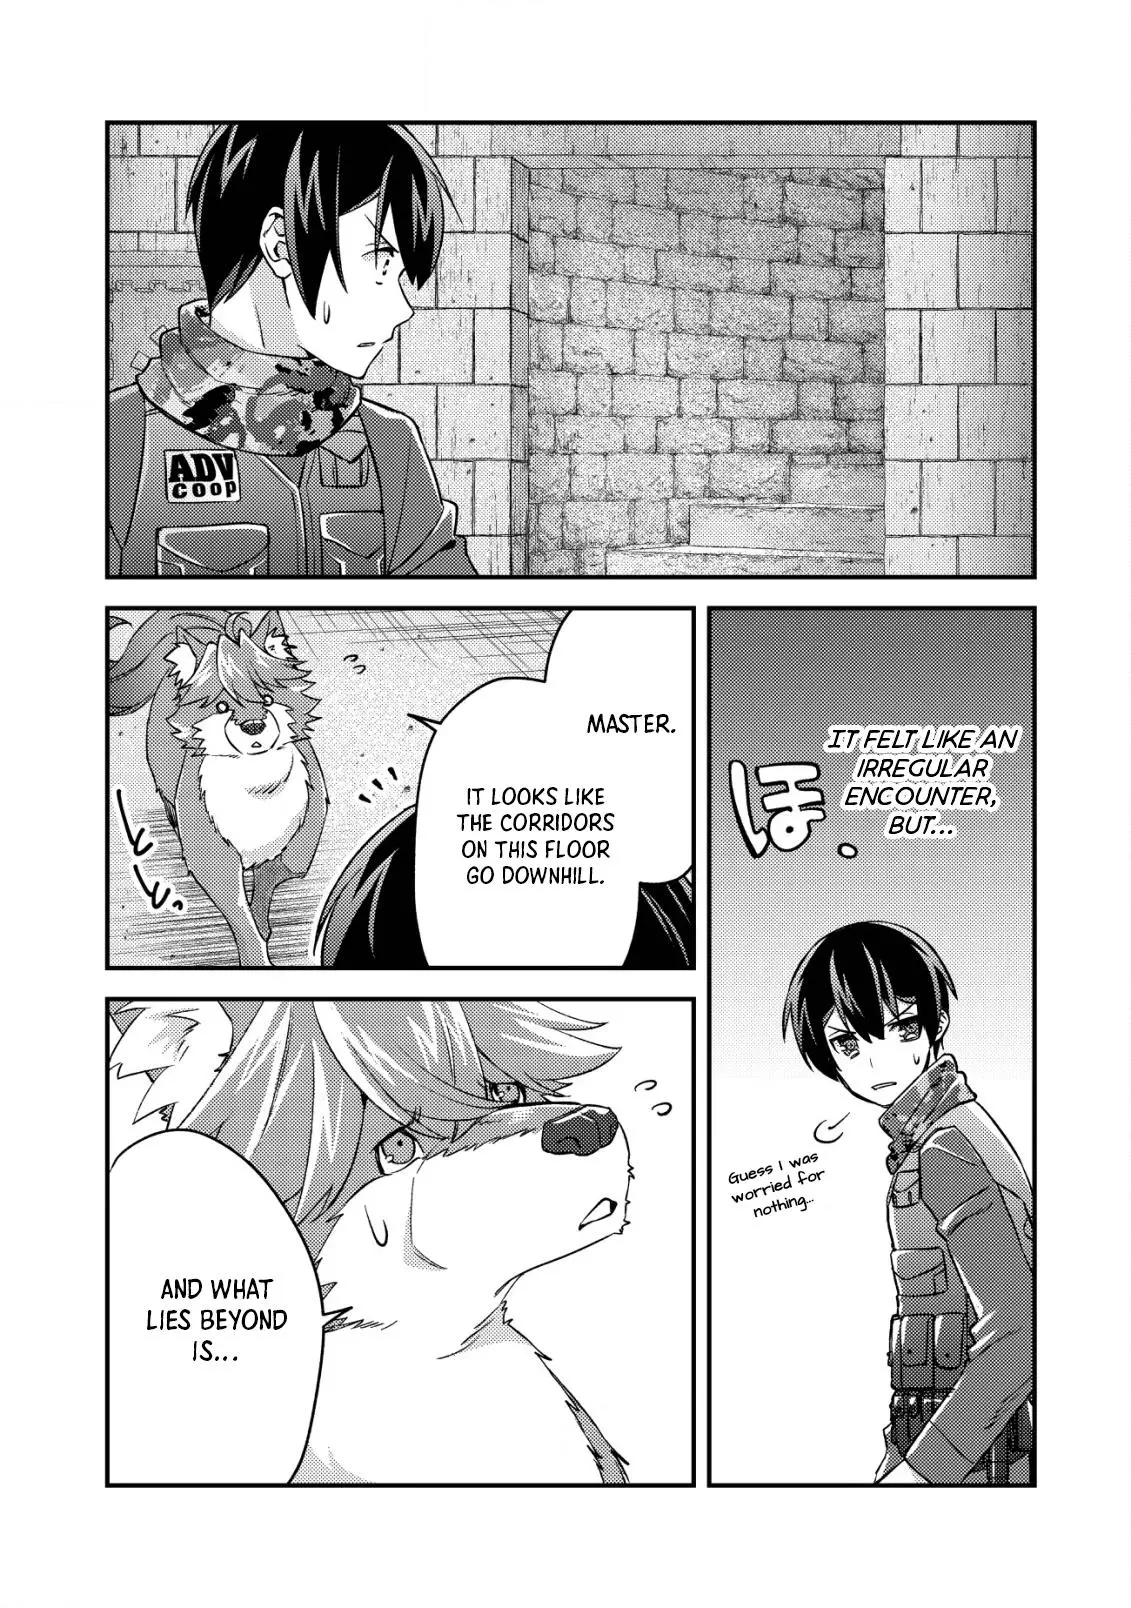 Can Even A Mob Highschooler Like Me Be A Normie If I Become An Adventurer? - 17.1 page 5-ead98e88